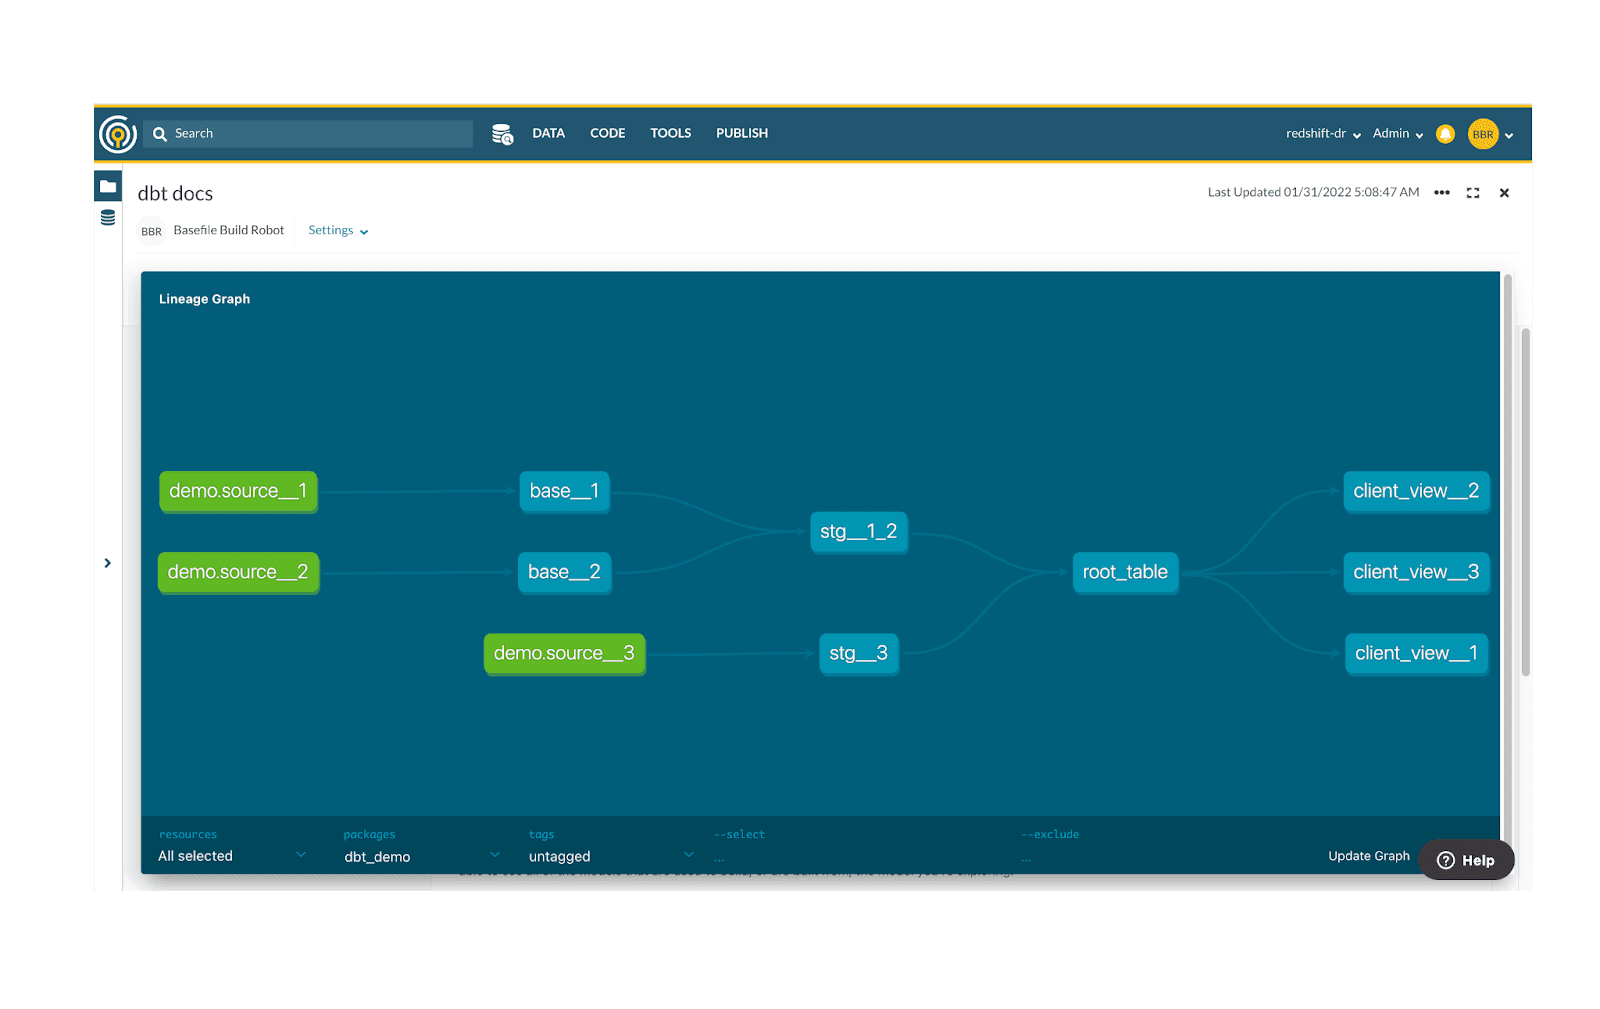 Workflow overview for a complicated Civis Platform build